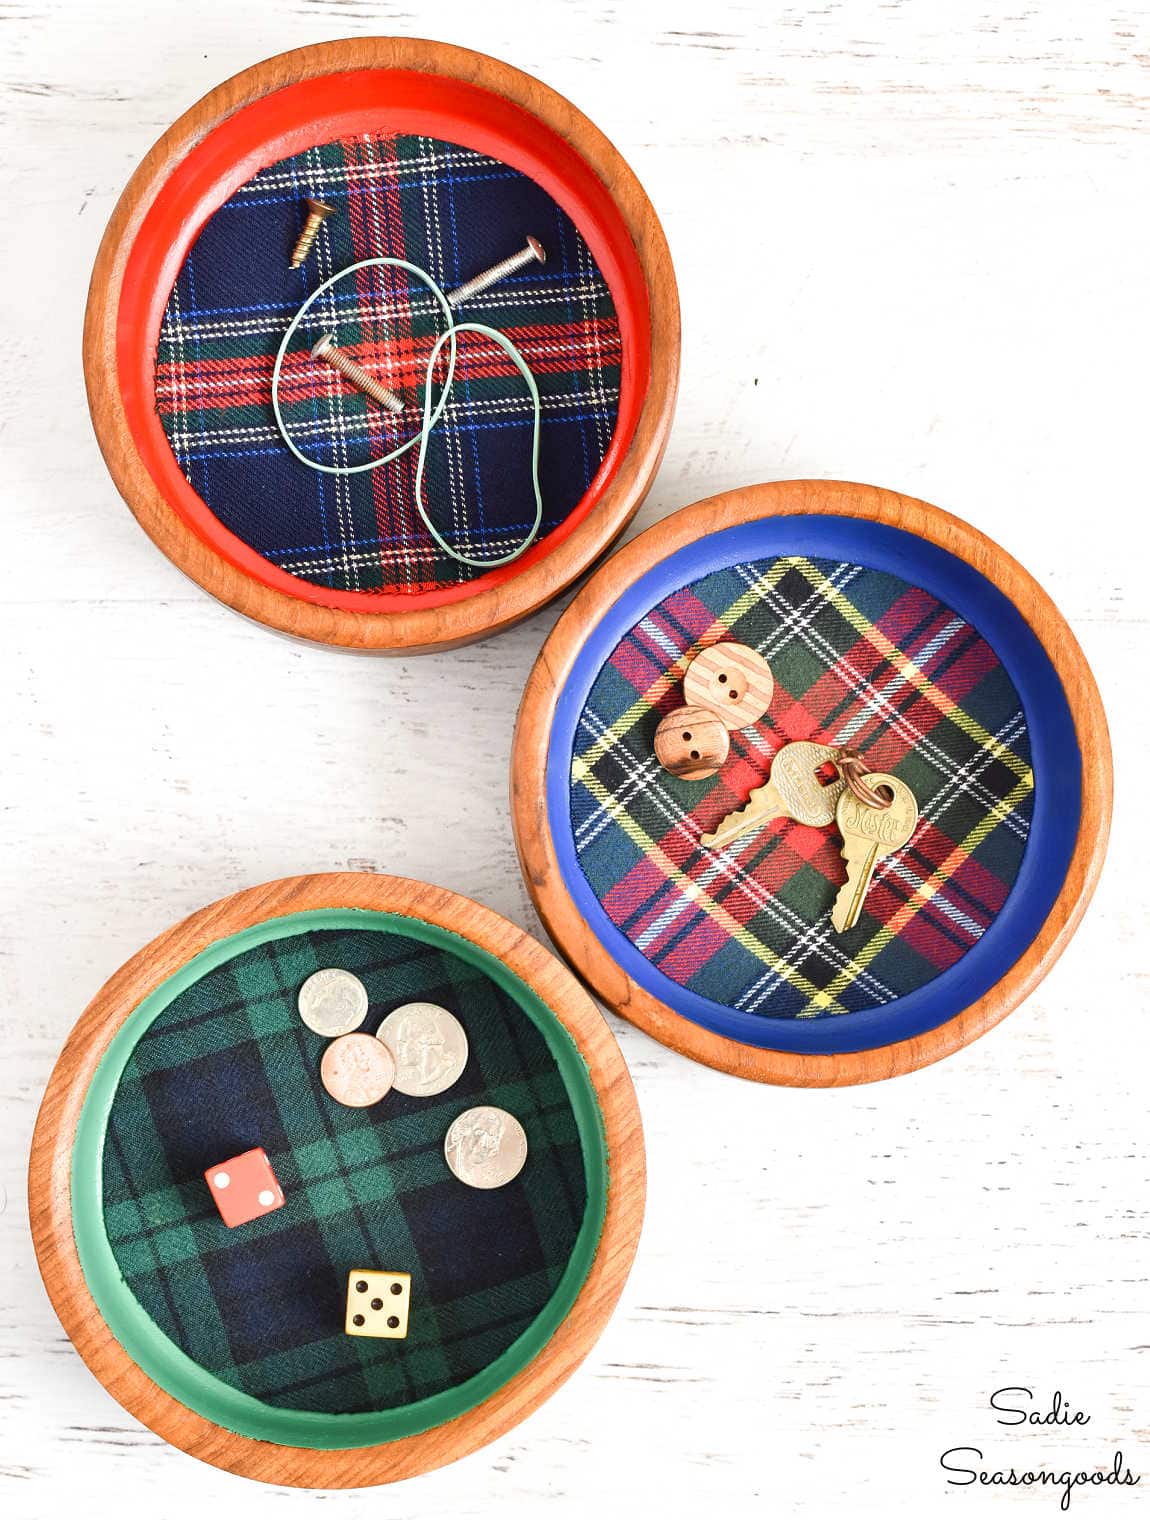 valet bowls from crafting with flannel